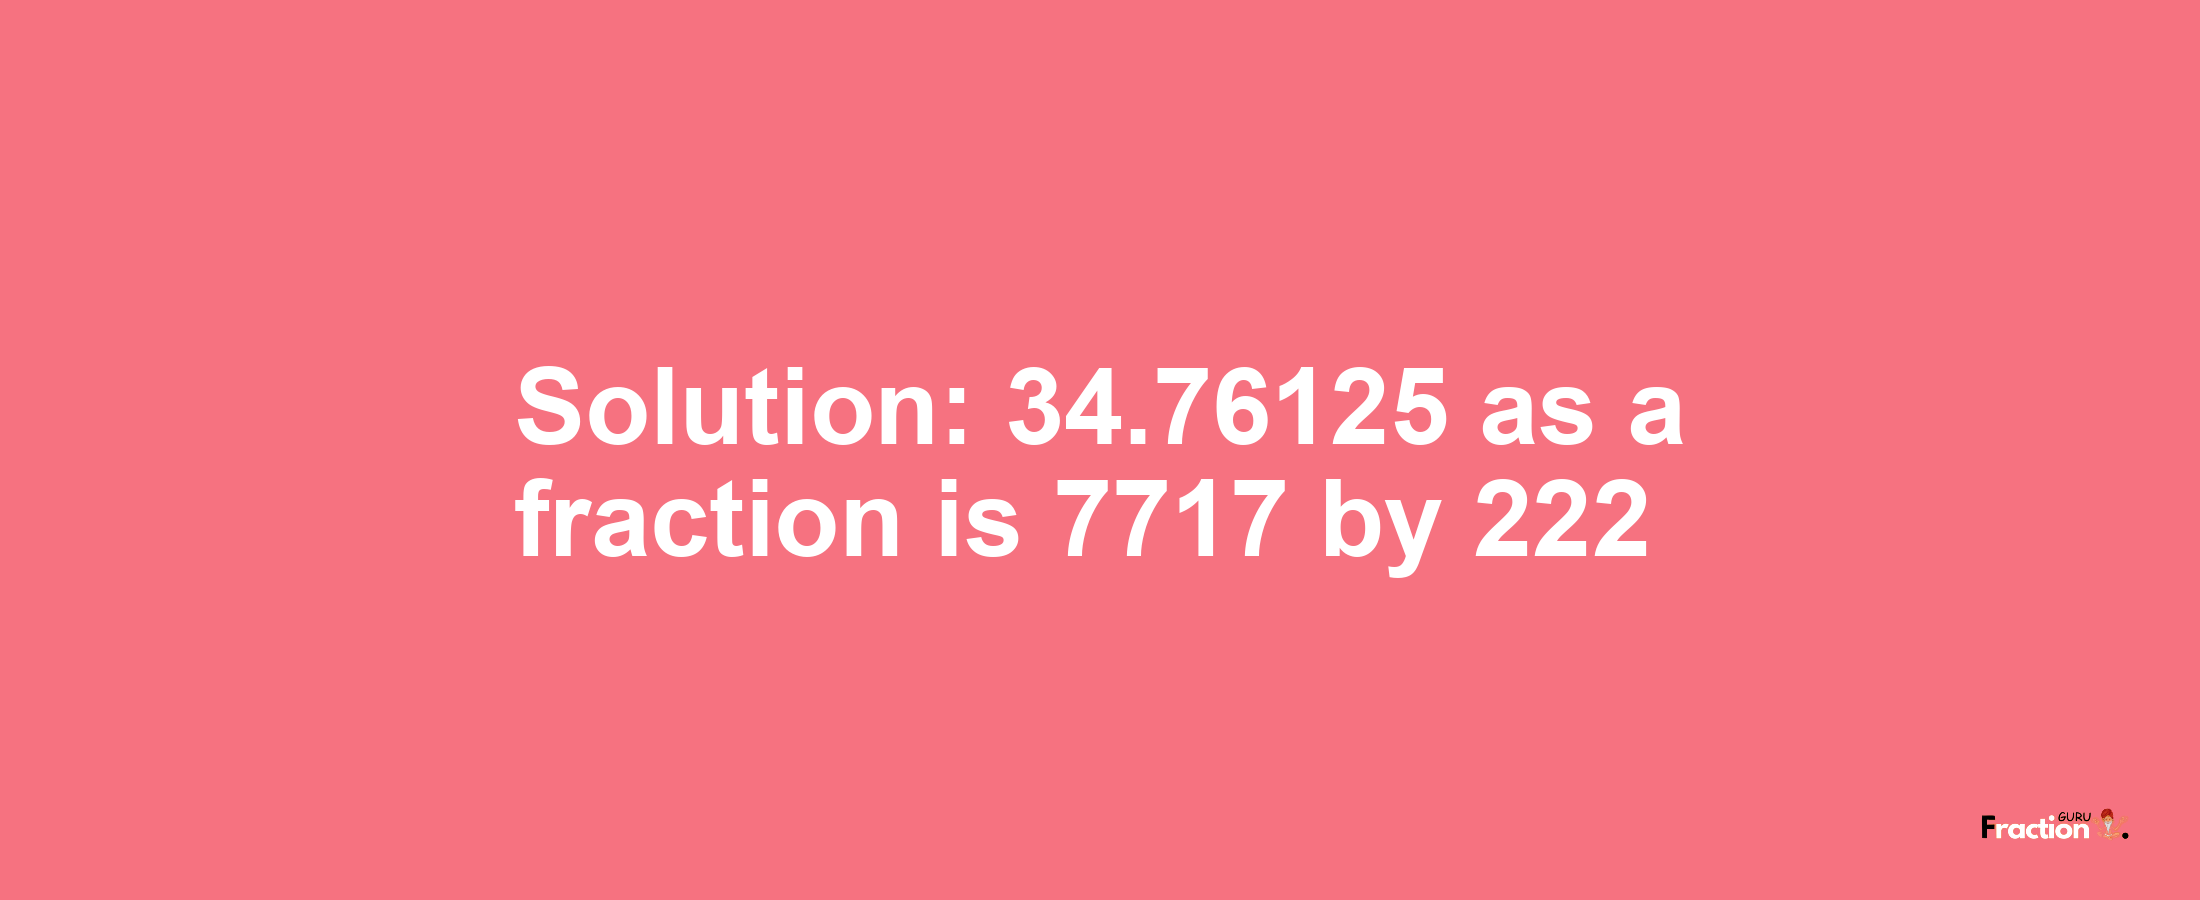 Solution:34.76125 as a fraction is 7717/222